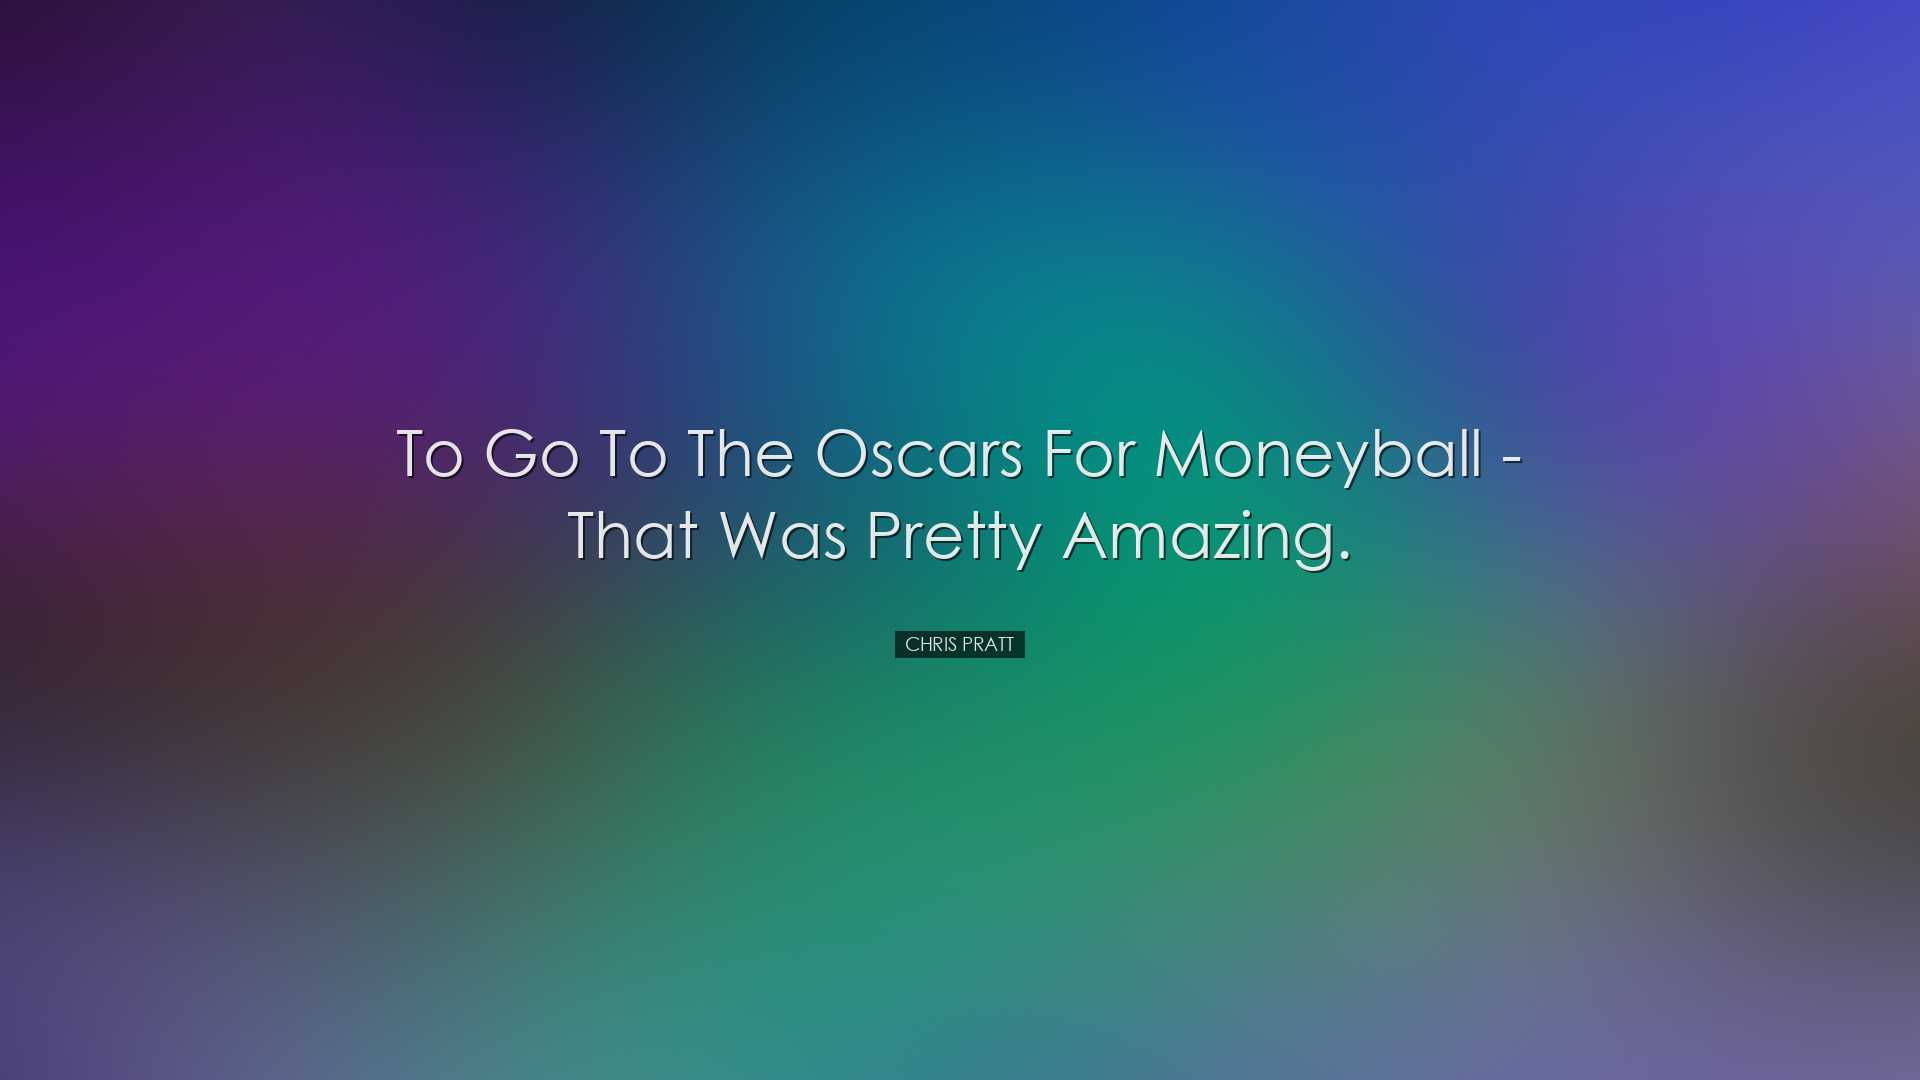 To go to the Oscars for Moneyball - that was pretty amazing. - Chr